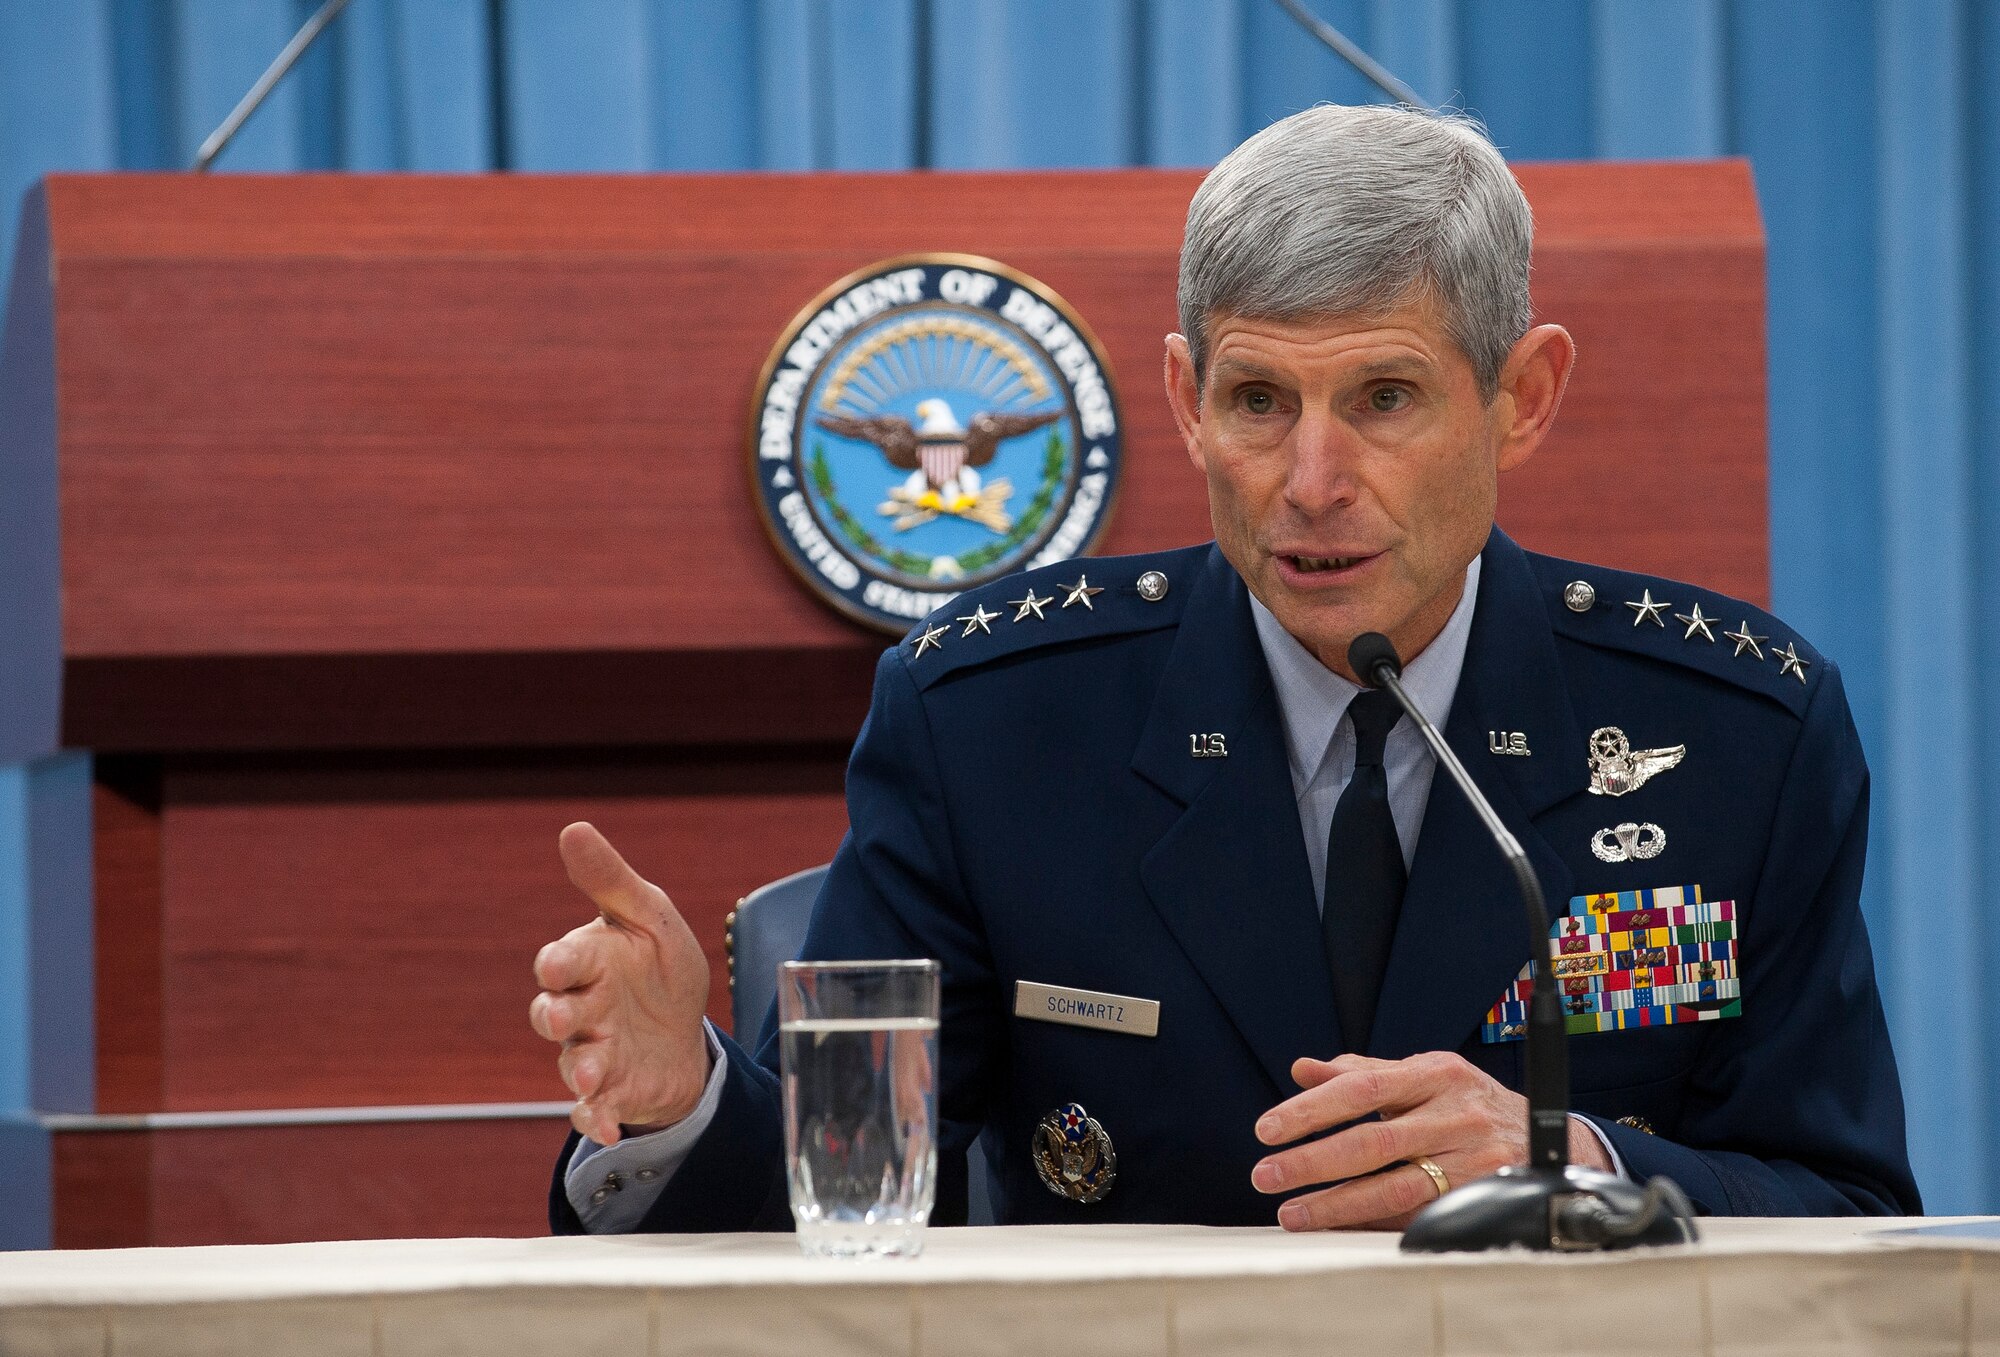 Air Force Chief of Staff Gen. Norton Schwartz responds to questions in the Pentagon on July 24, 2012, during a media availability to discuss Air Force accomplishments during his time as Chief of Staff.  (U.S. Air Force photo/James Varhegyi)